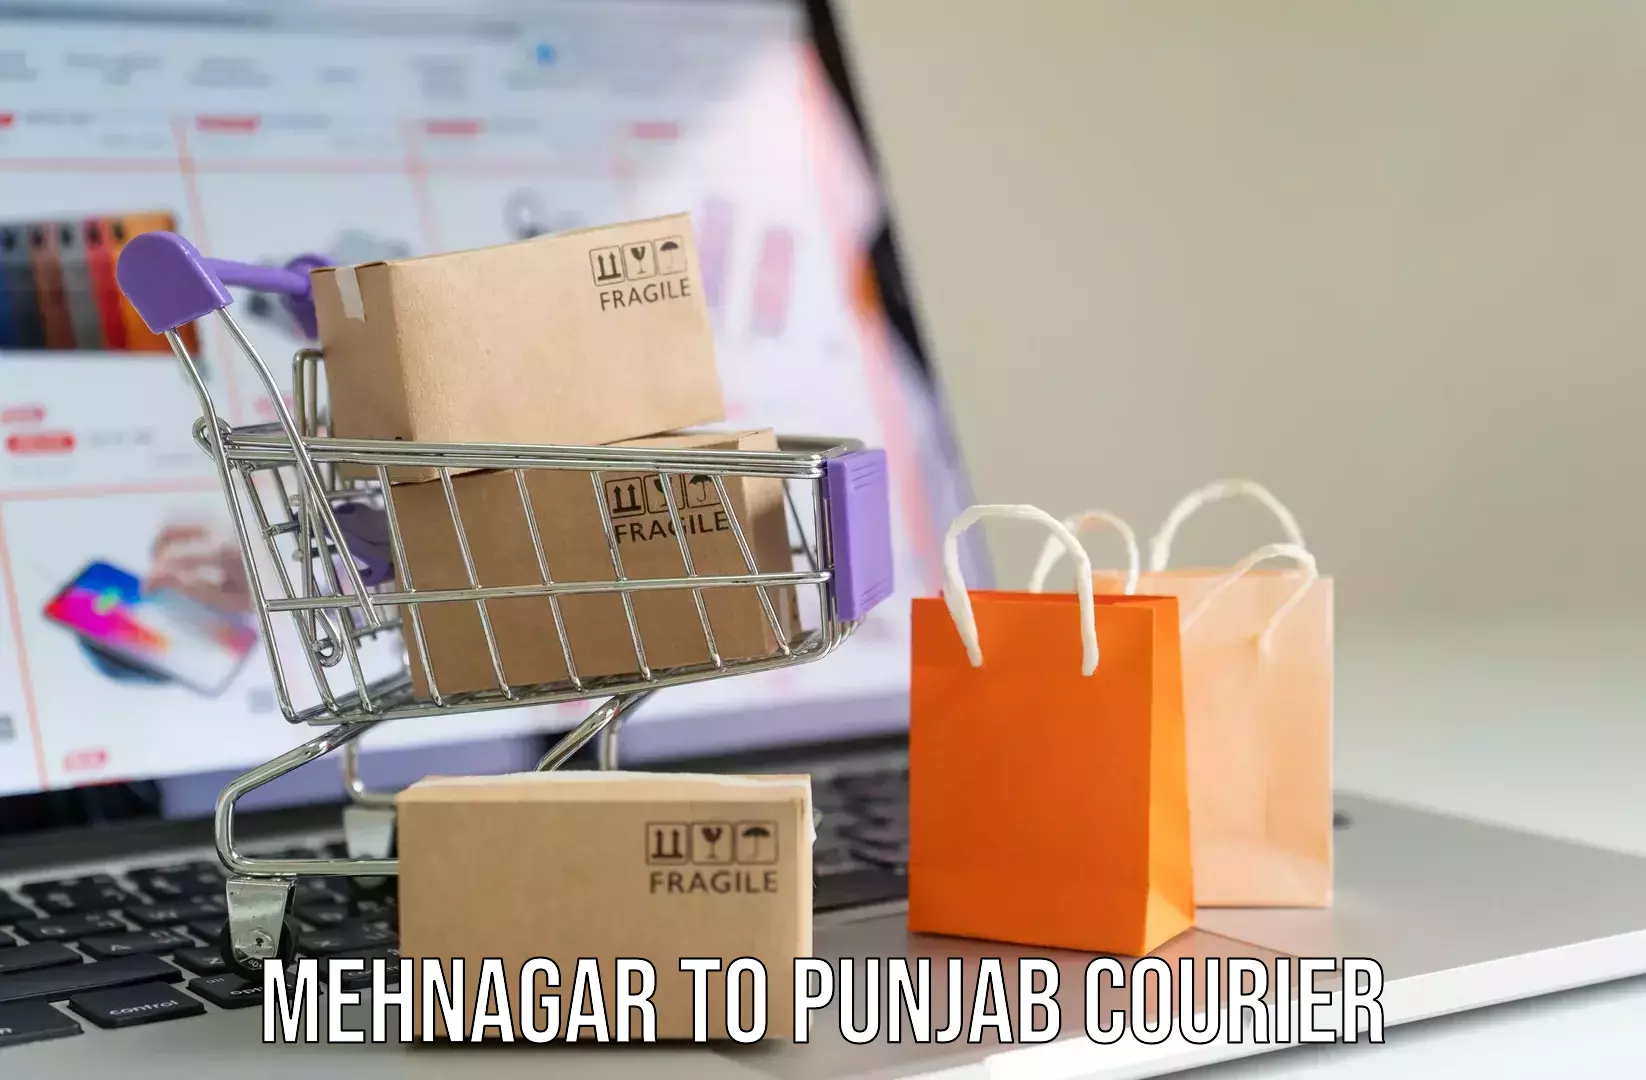 Luggage delivery network Mehnagar to Malout